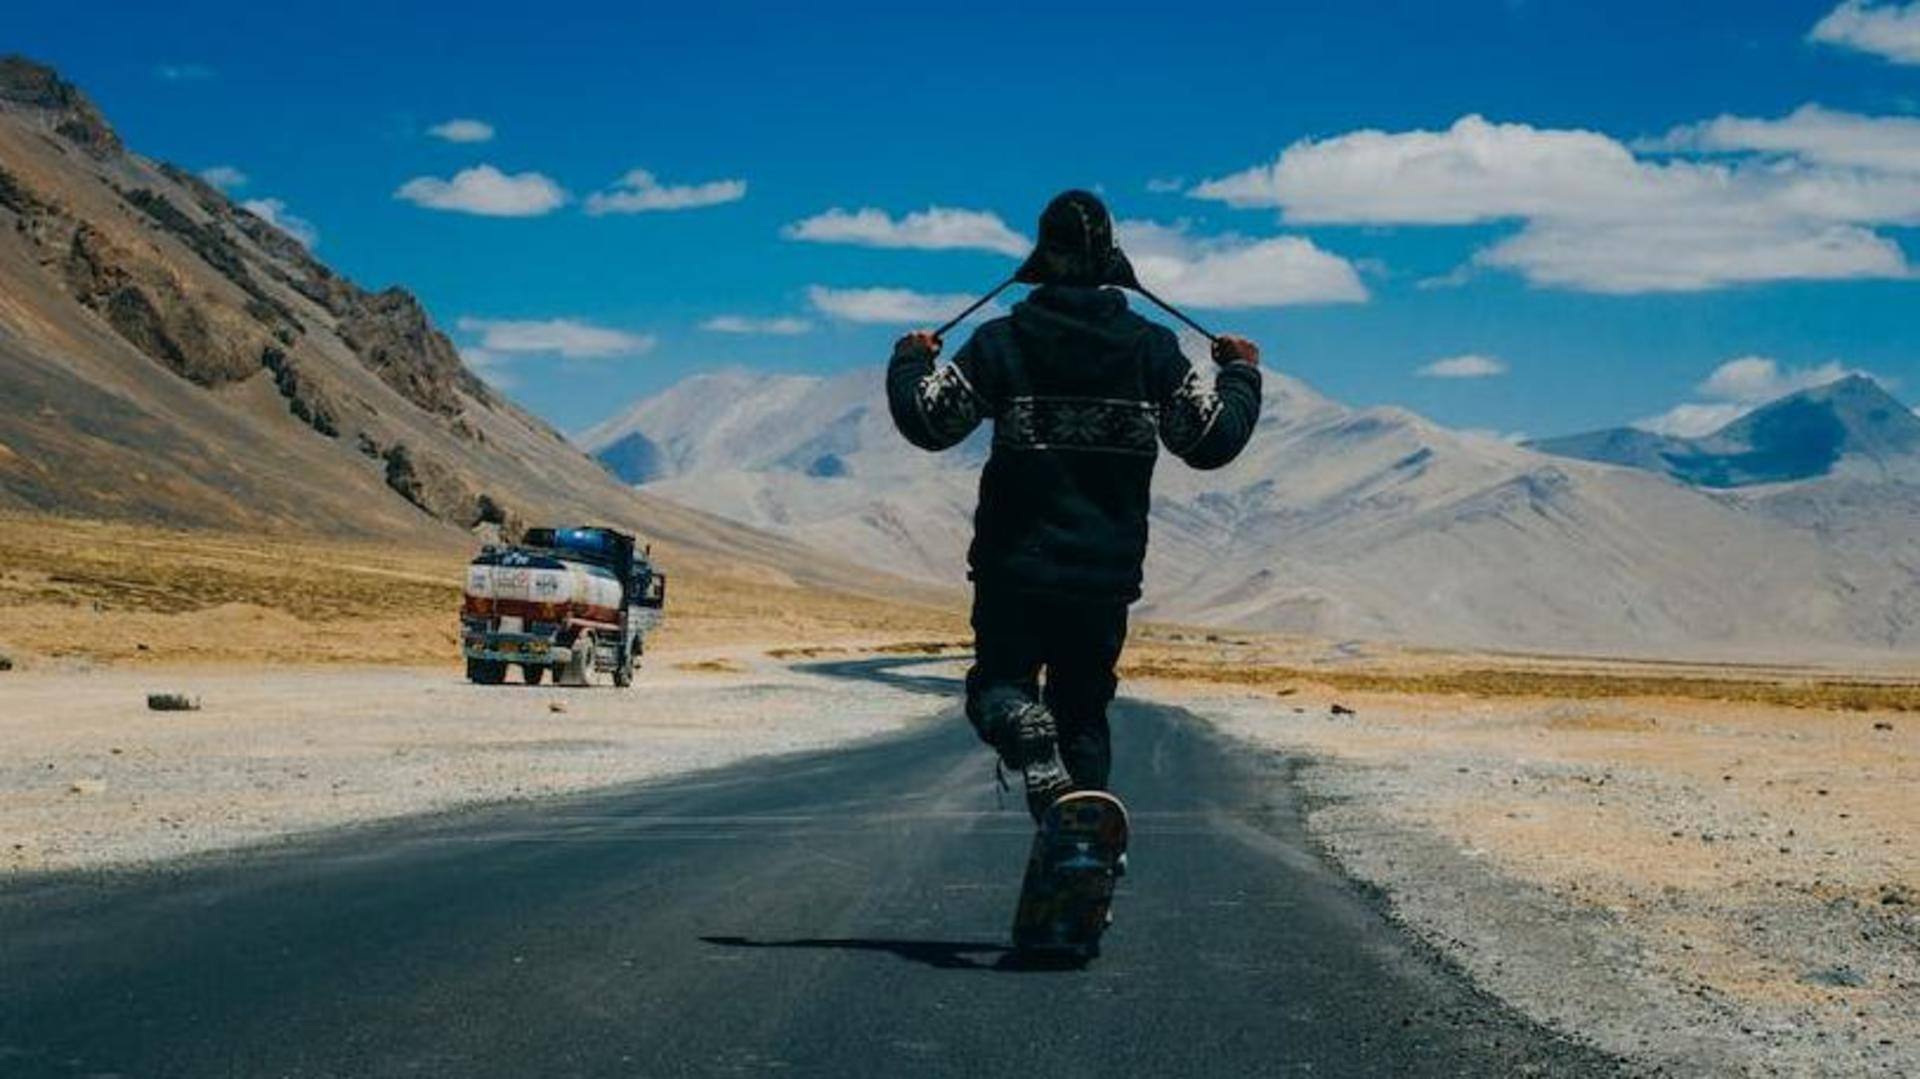 Gear up to explore these forbidden lands in Ladakh